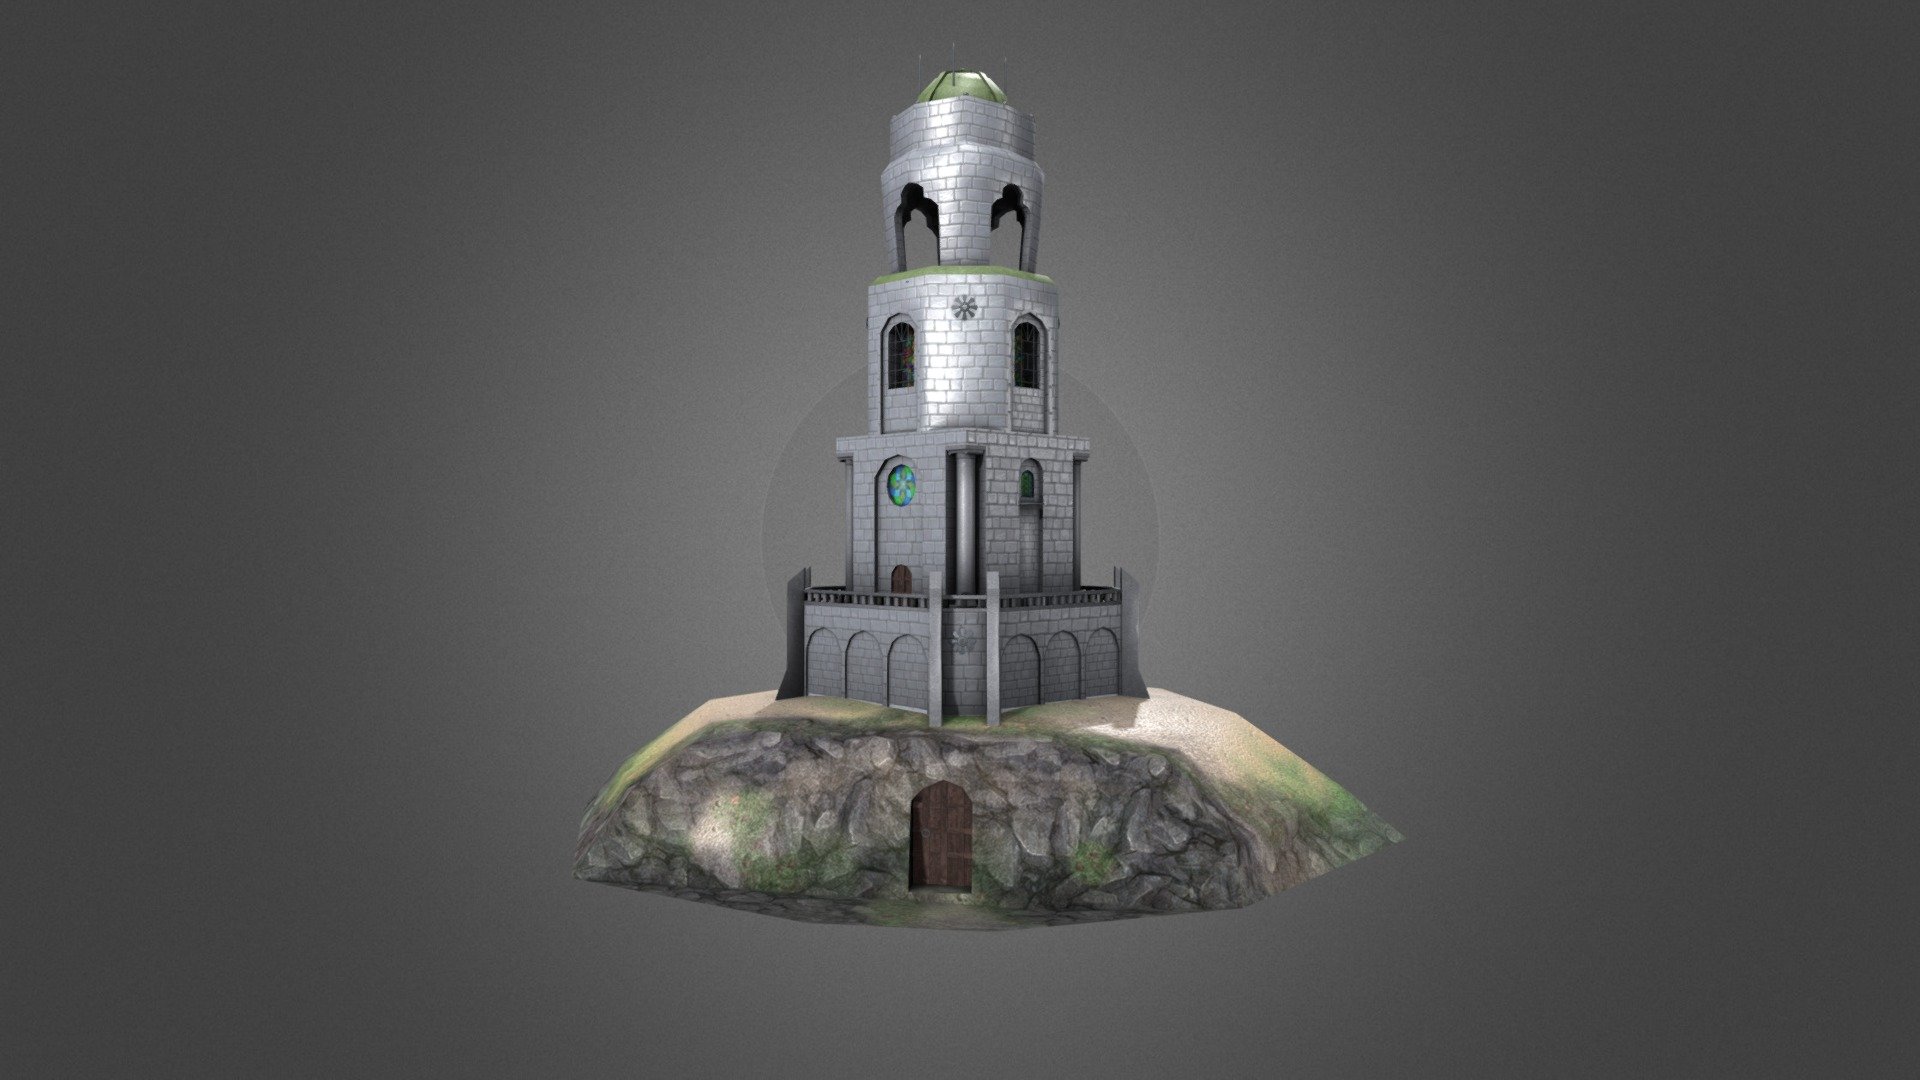 Low poly game-ready 3d model of a Medieval Tower Of Albion

Download: http://gamedev.cgduck.pro - Medieval Tower Of Albion - 3D model by CG Duck (@cg_duck) 3d model